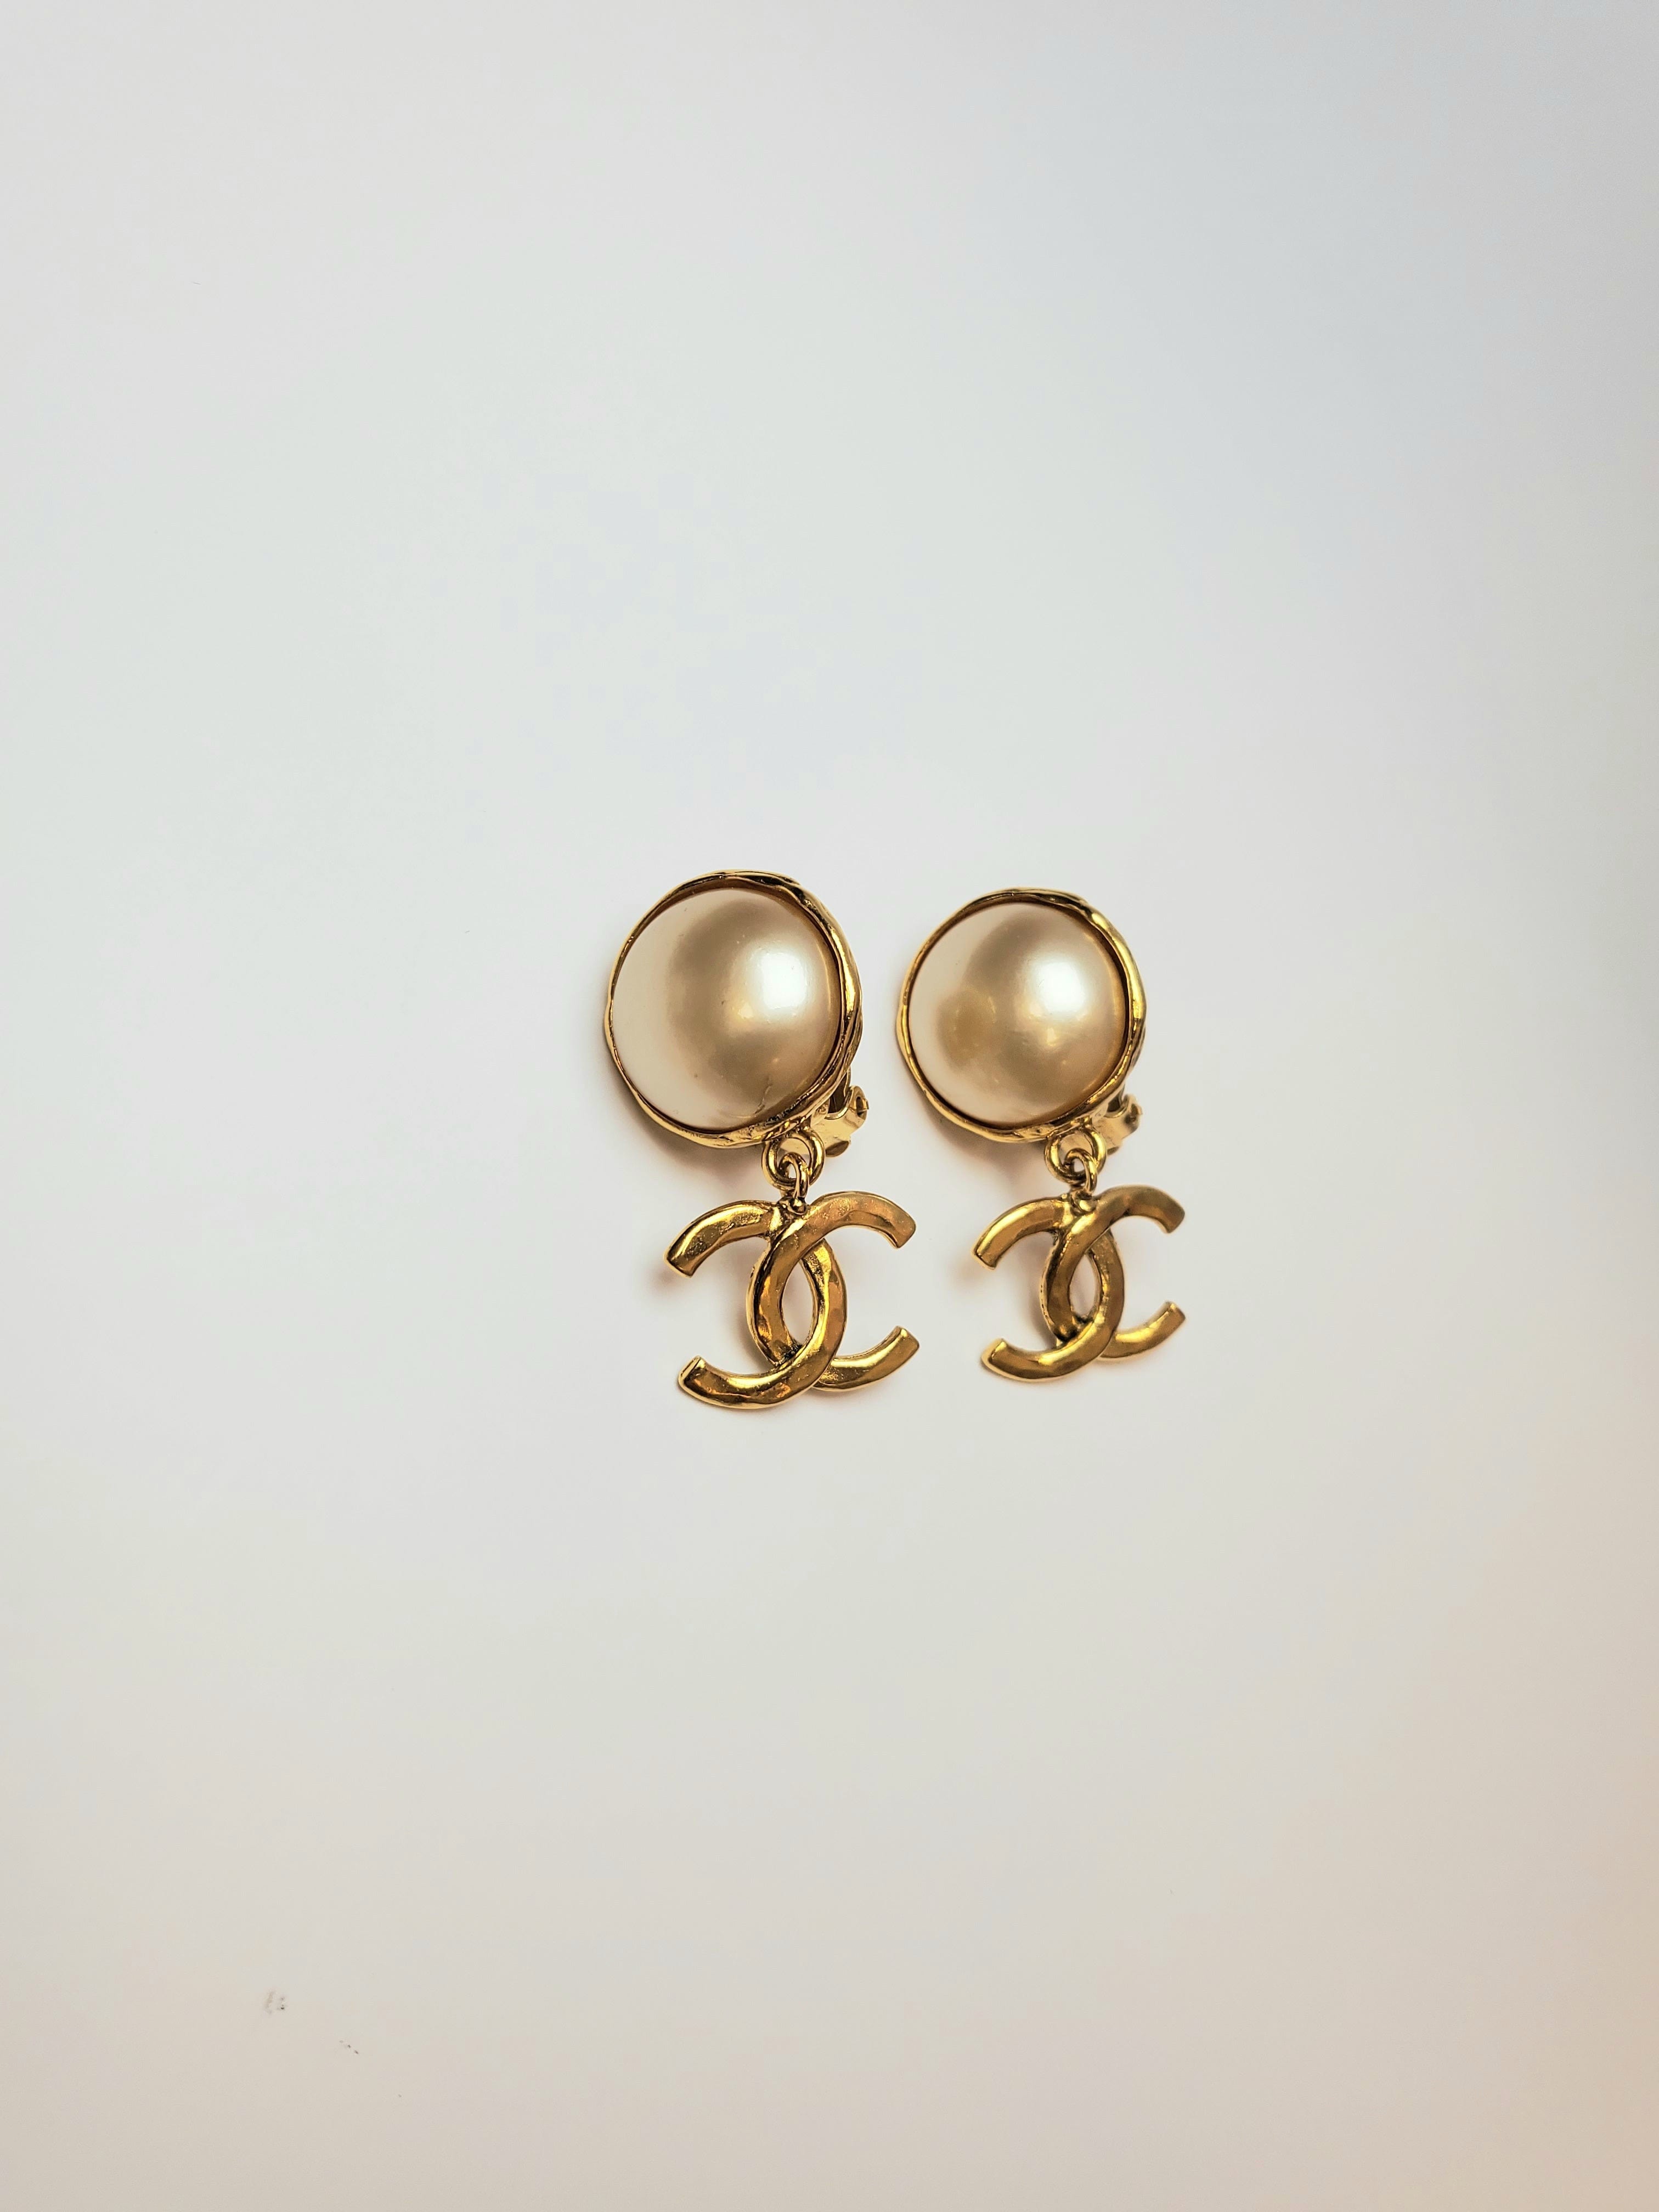 Chanel Hammered Pearl Earrings - Vintage Lux